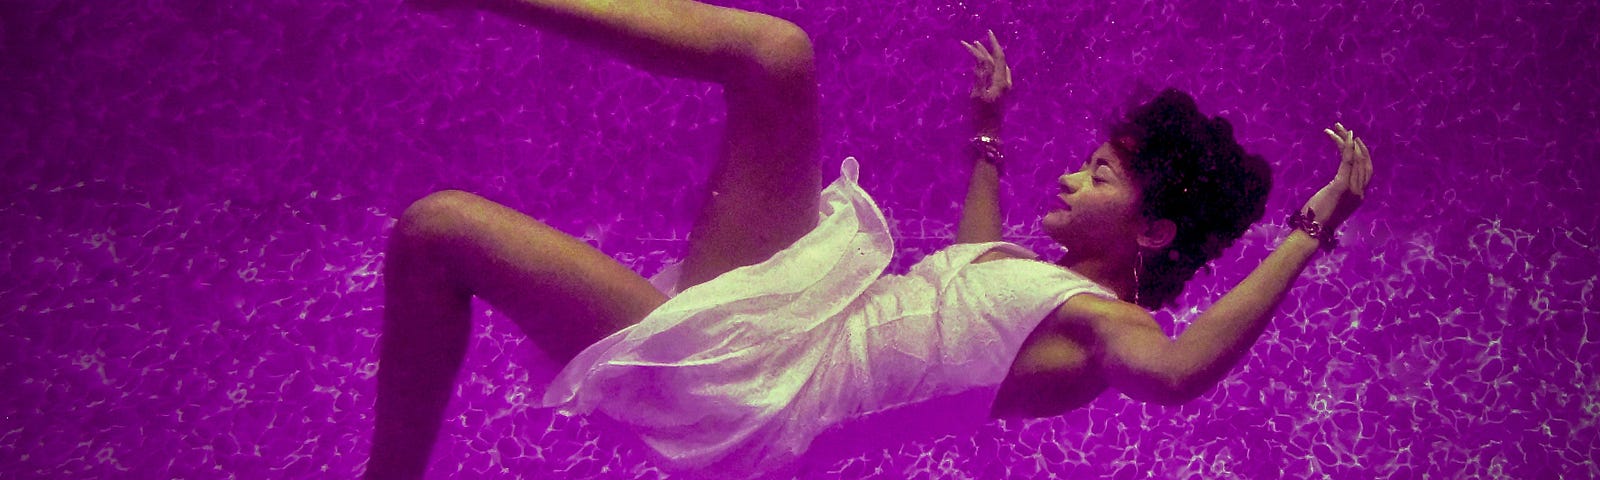 Image of woman wearing a white dress drifting into the unknown. Her arms are outstretched and she is surrounded by purple light.